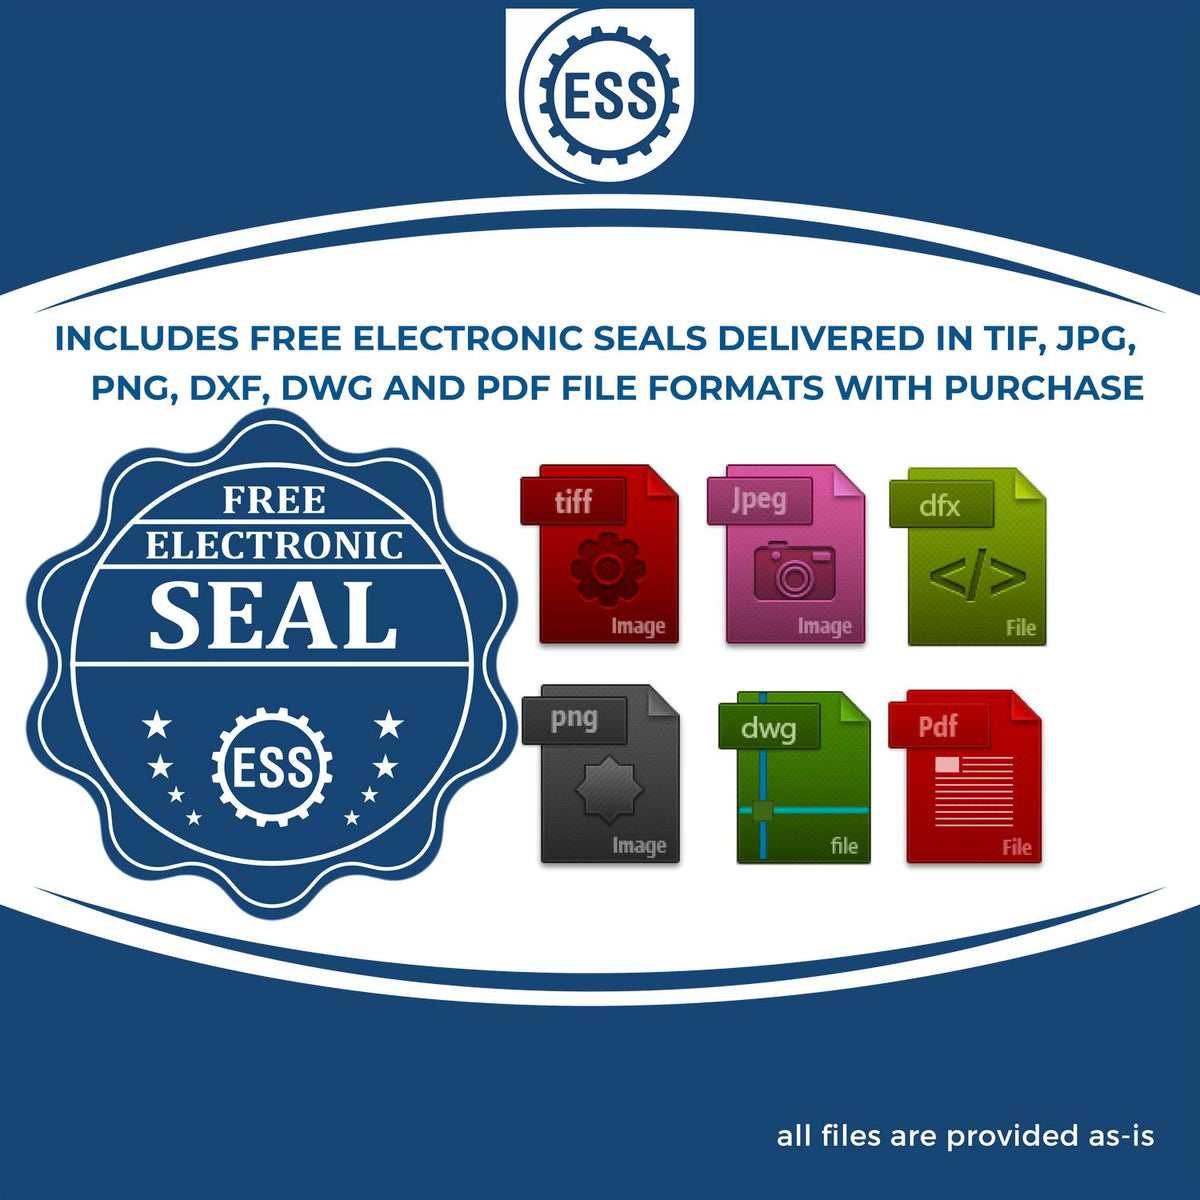 An infographic for the free electronic seal for the Soft Mississippi Professional Geologist Seal illustrating the different file type icons such as DXF, DWG, TIF, JPG and PNG.